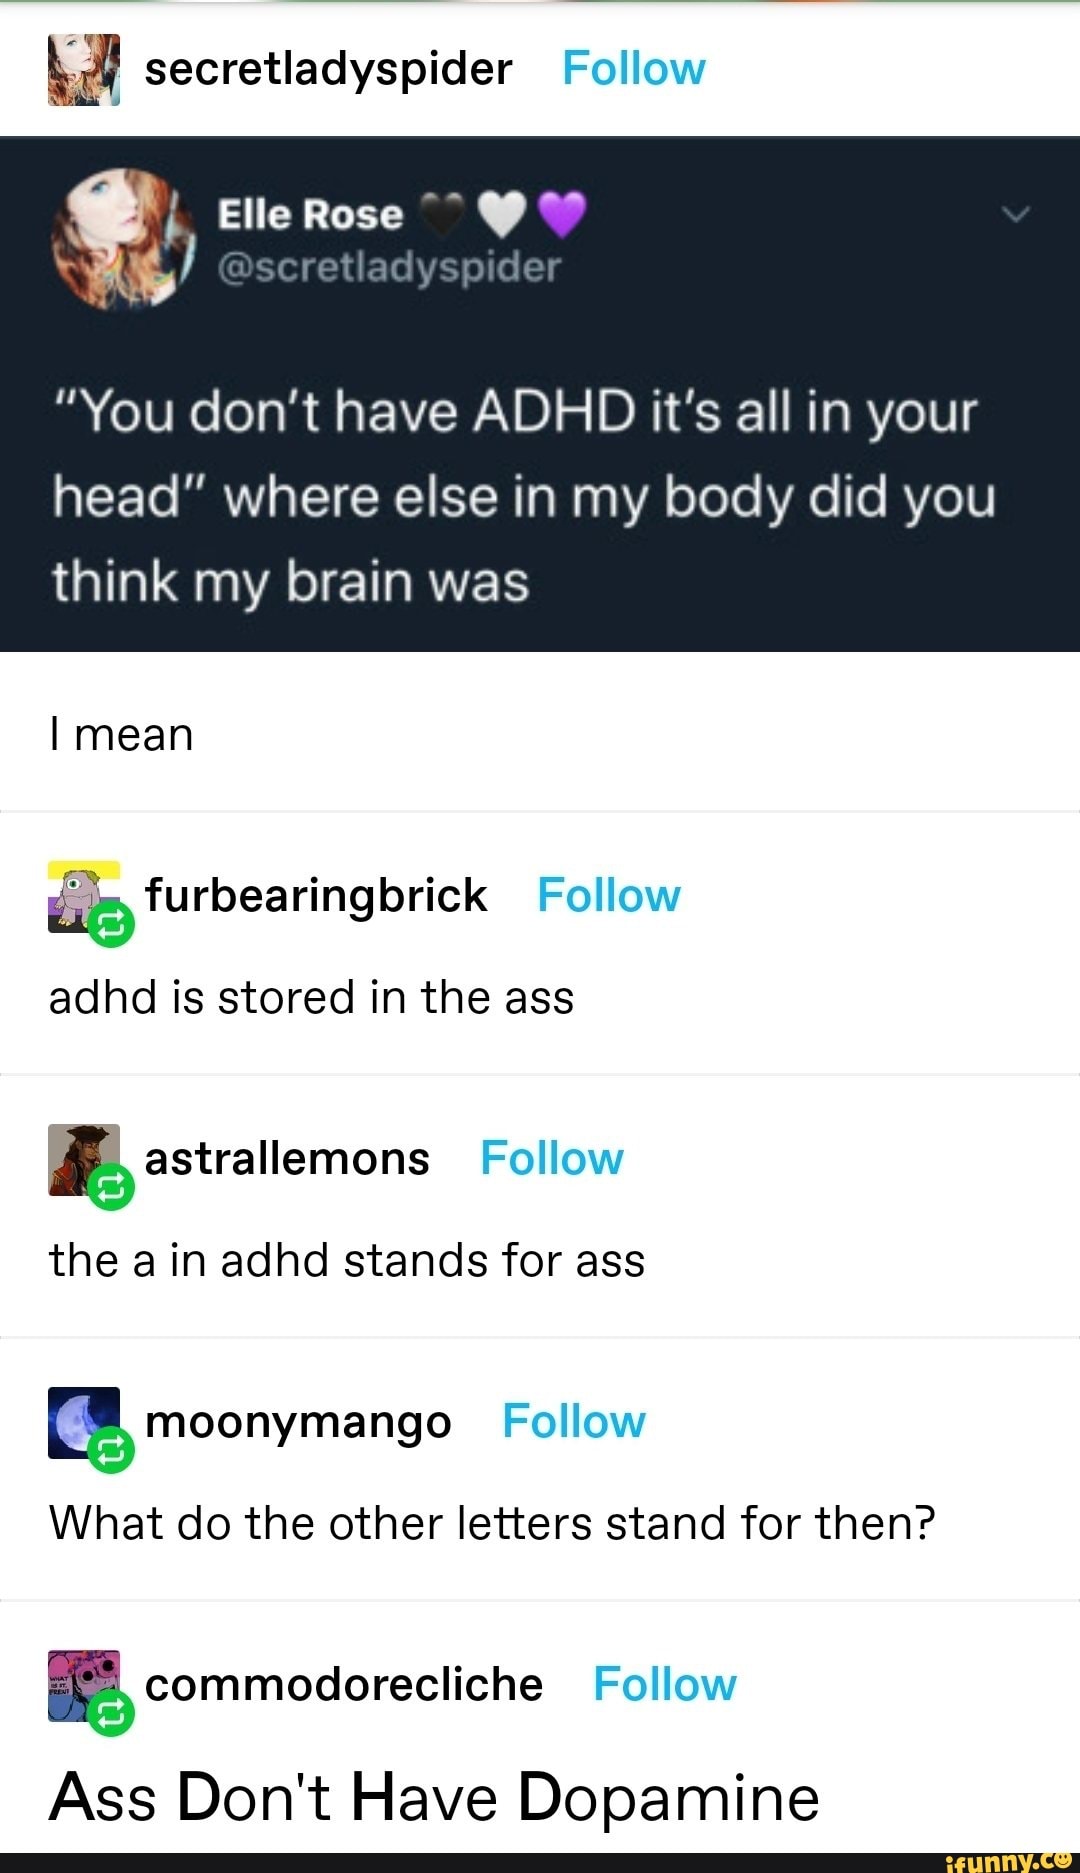 adhd stands for